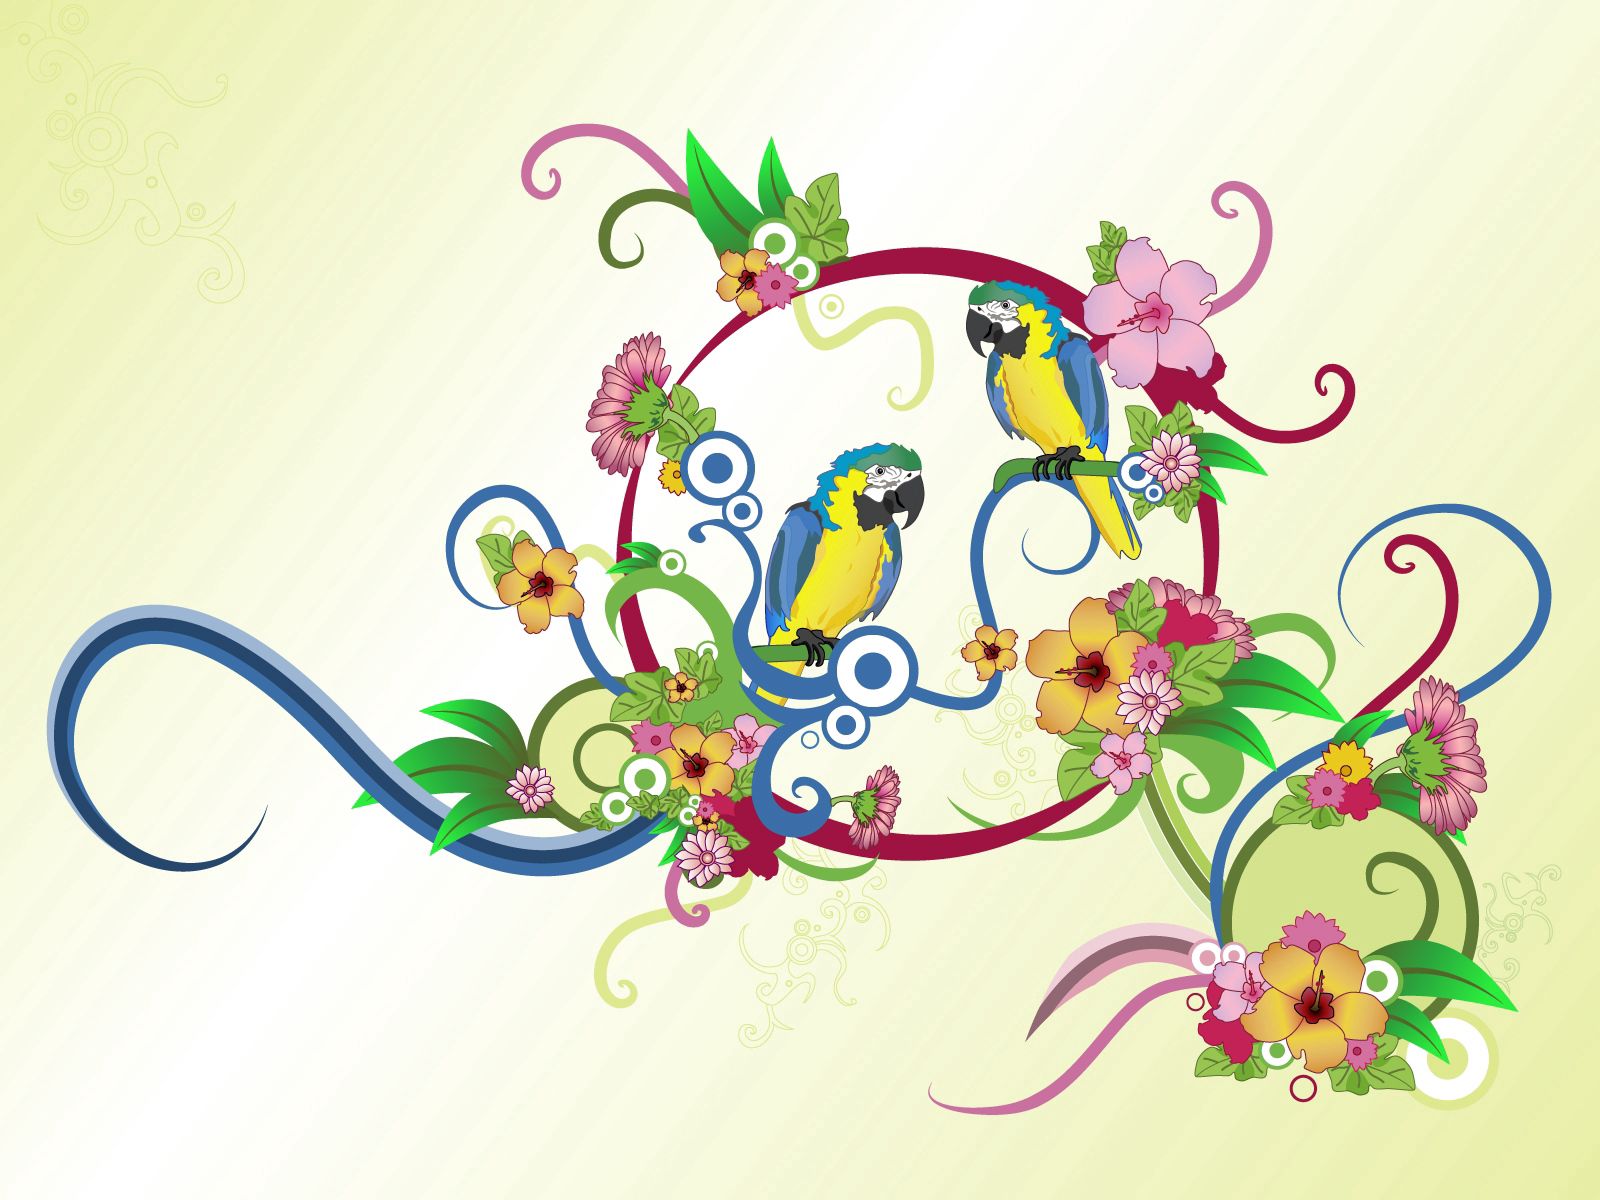 New Lock Screen Wallpapers flowers, parrots, patterns, vector, multicolored, motley